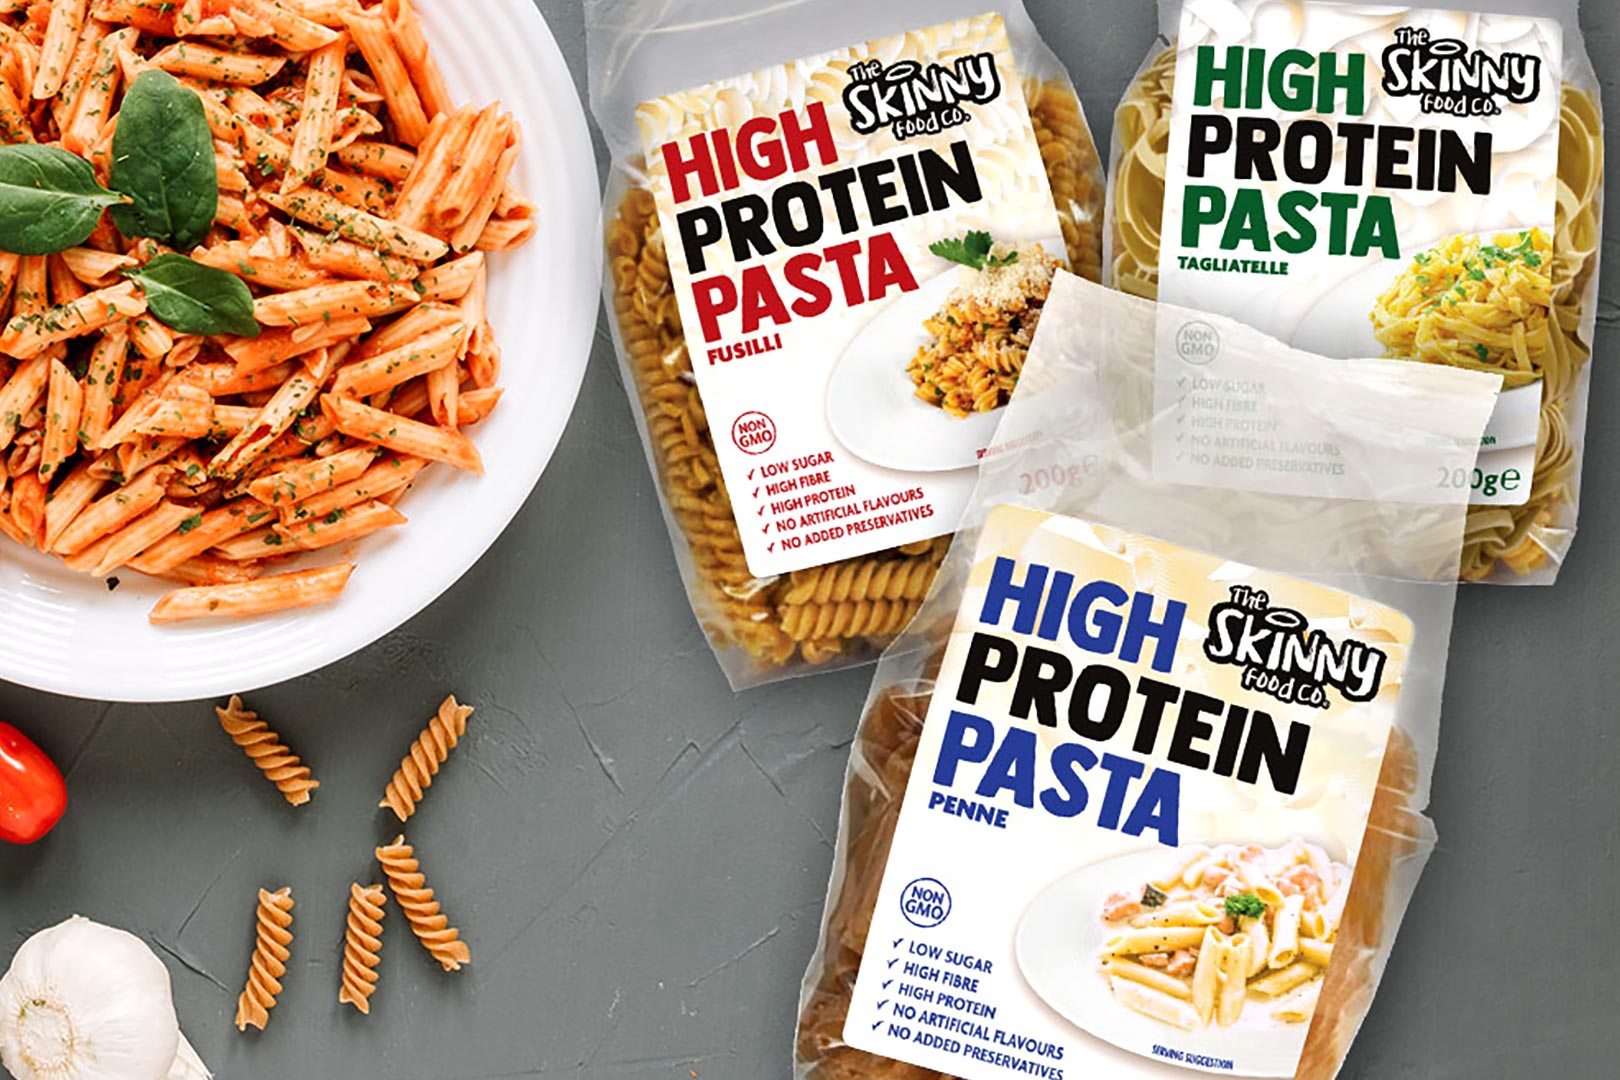 Skinny Food Co High Protein Pasta